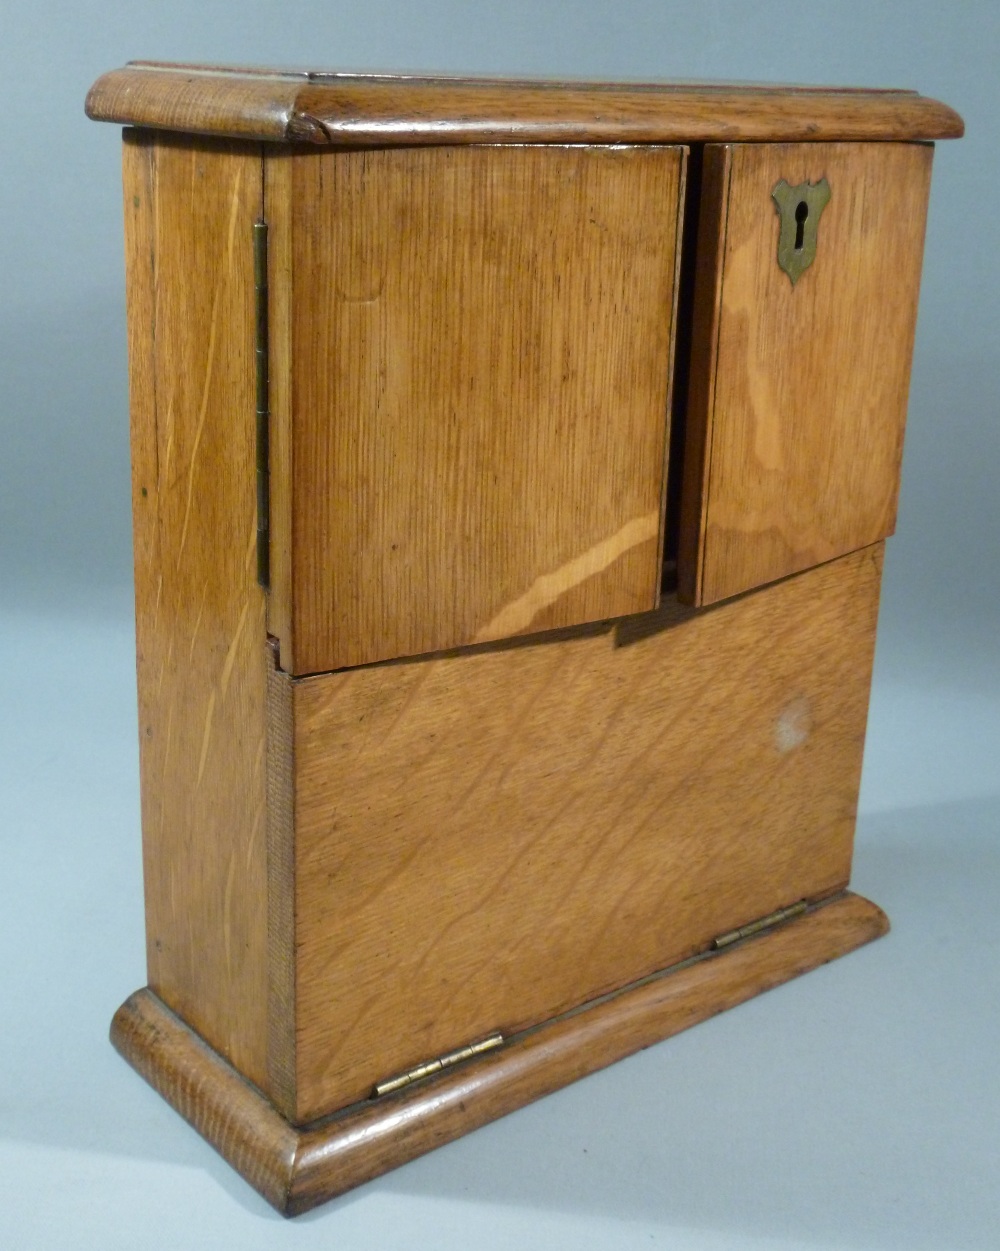 LATE C19th VICTORIAN/EDWARDIAN OAK KEY CABINET WITH TWO DOORS AND DROP FRONT (25 cm x 21.5 cm x 8.